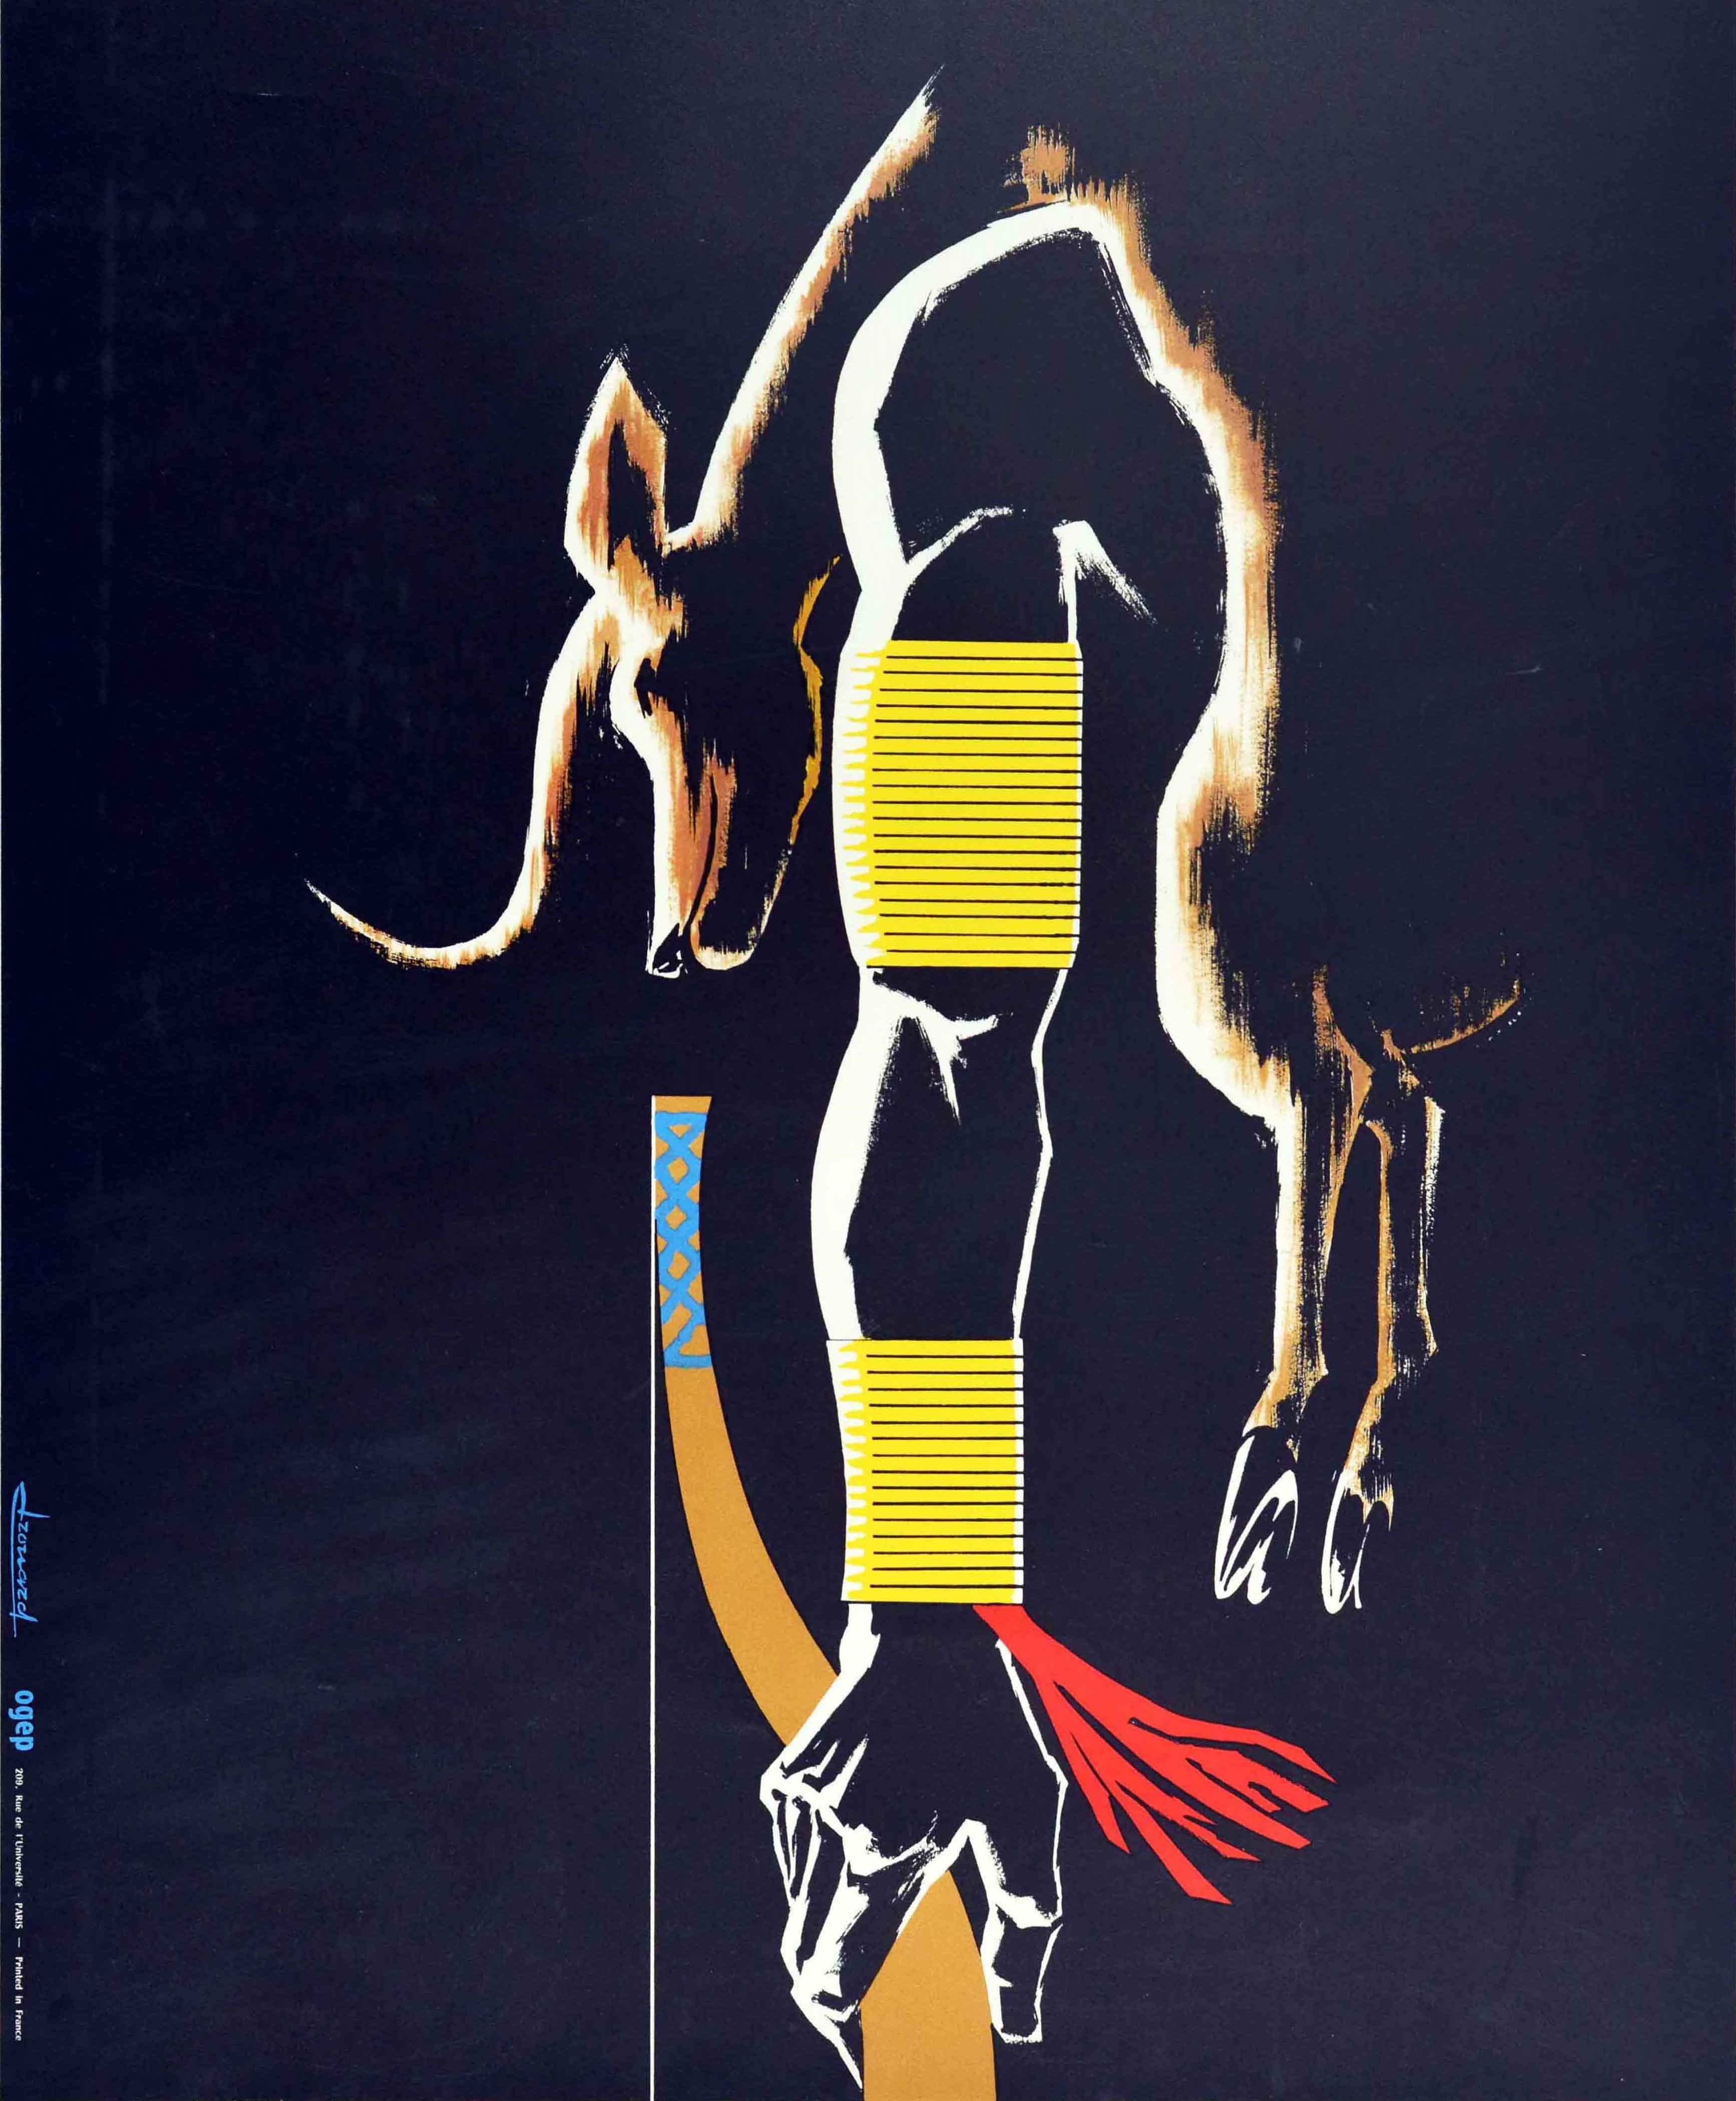 Original vintage travel poster for Mali in West Africa featuring a colourful artistic image on a dark background of a hunter's arm with an antelope draped over his shoulder and a bow in his hand, the bold title lettering above. Printed in Paris.